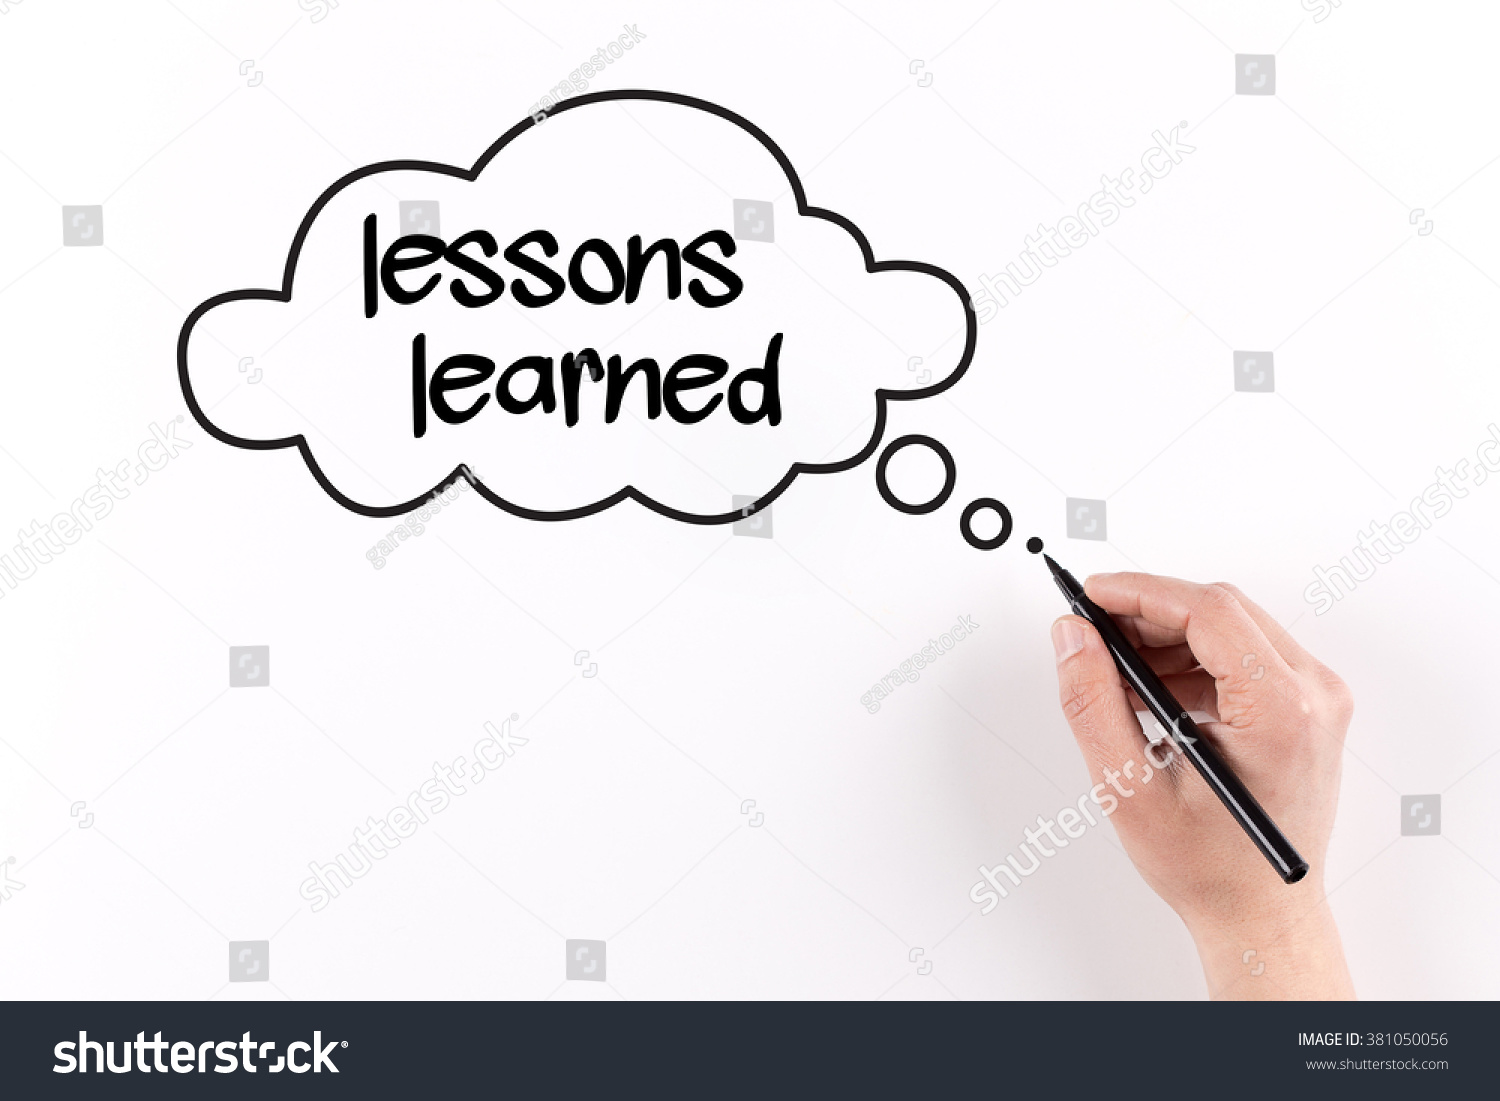 Hand writing Lessons learned on white paper, View from above #381050056